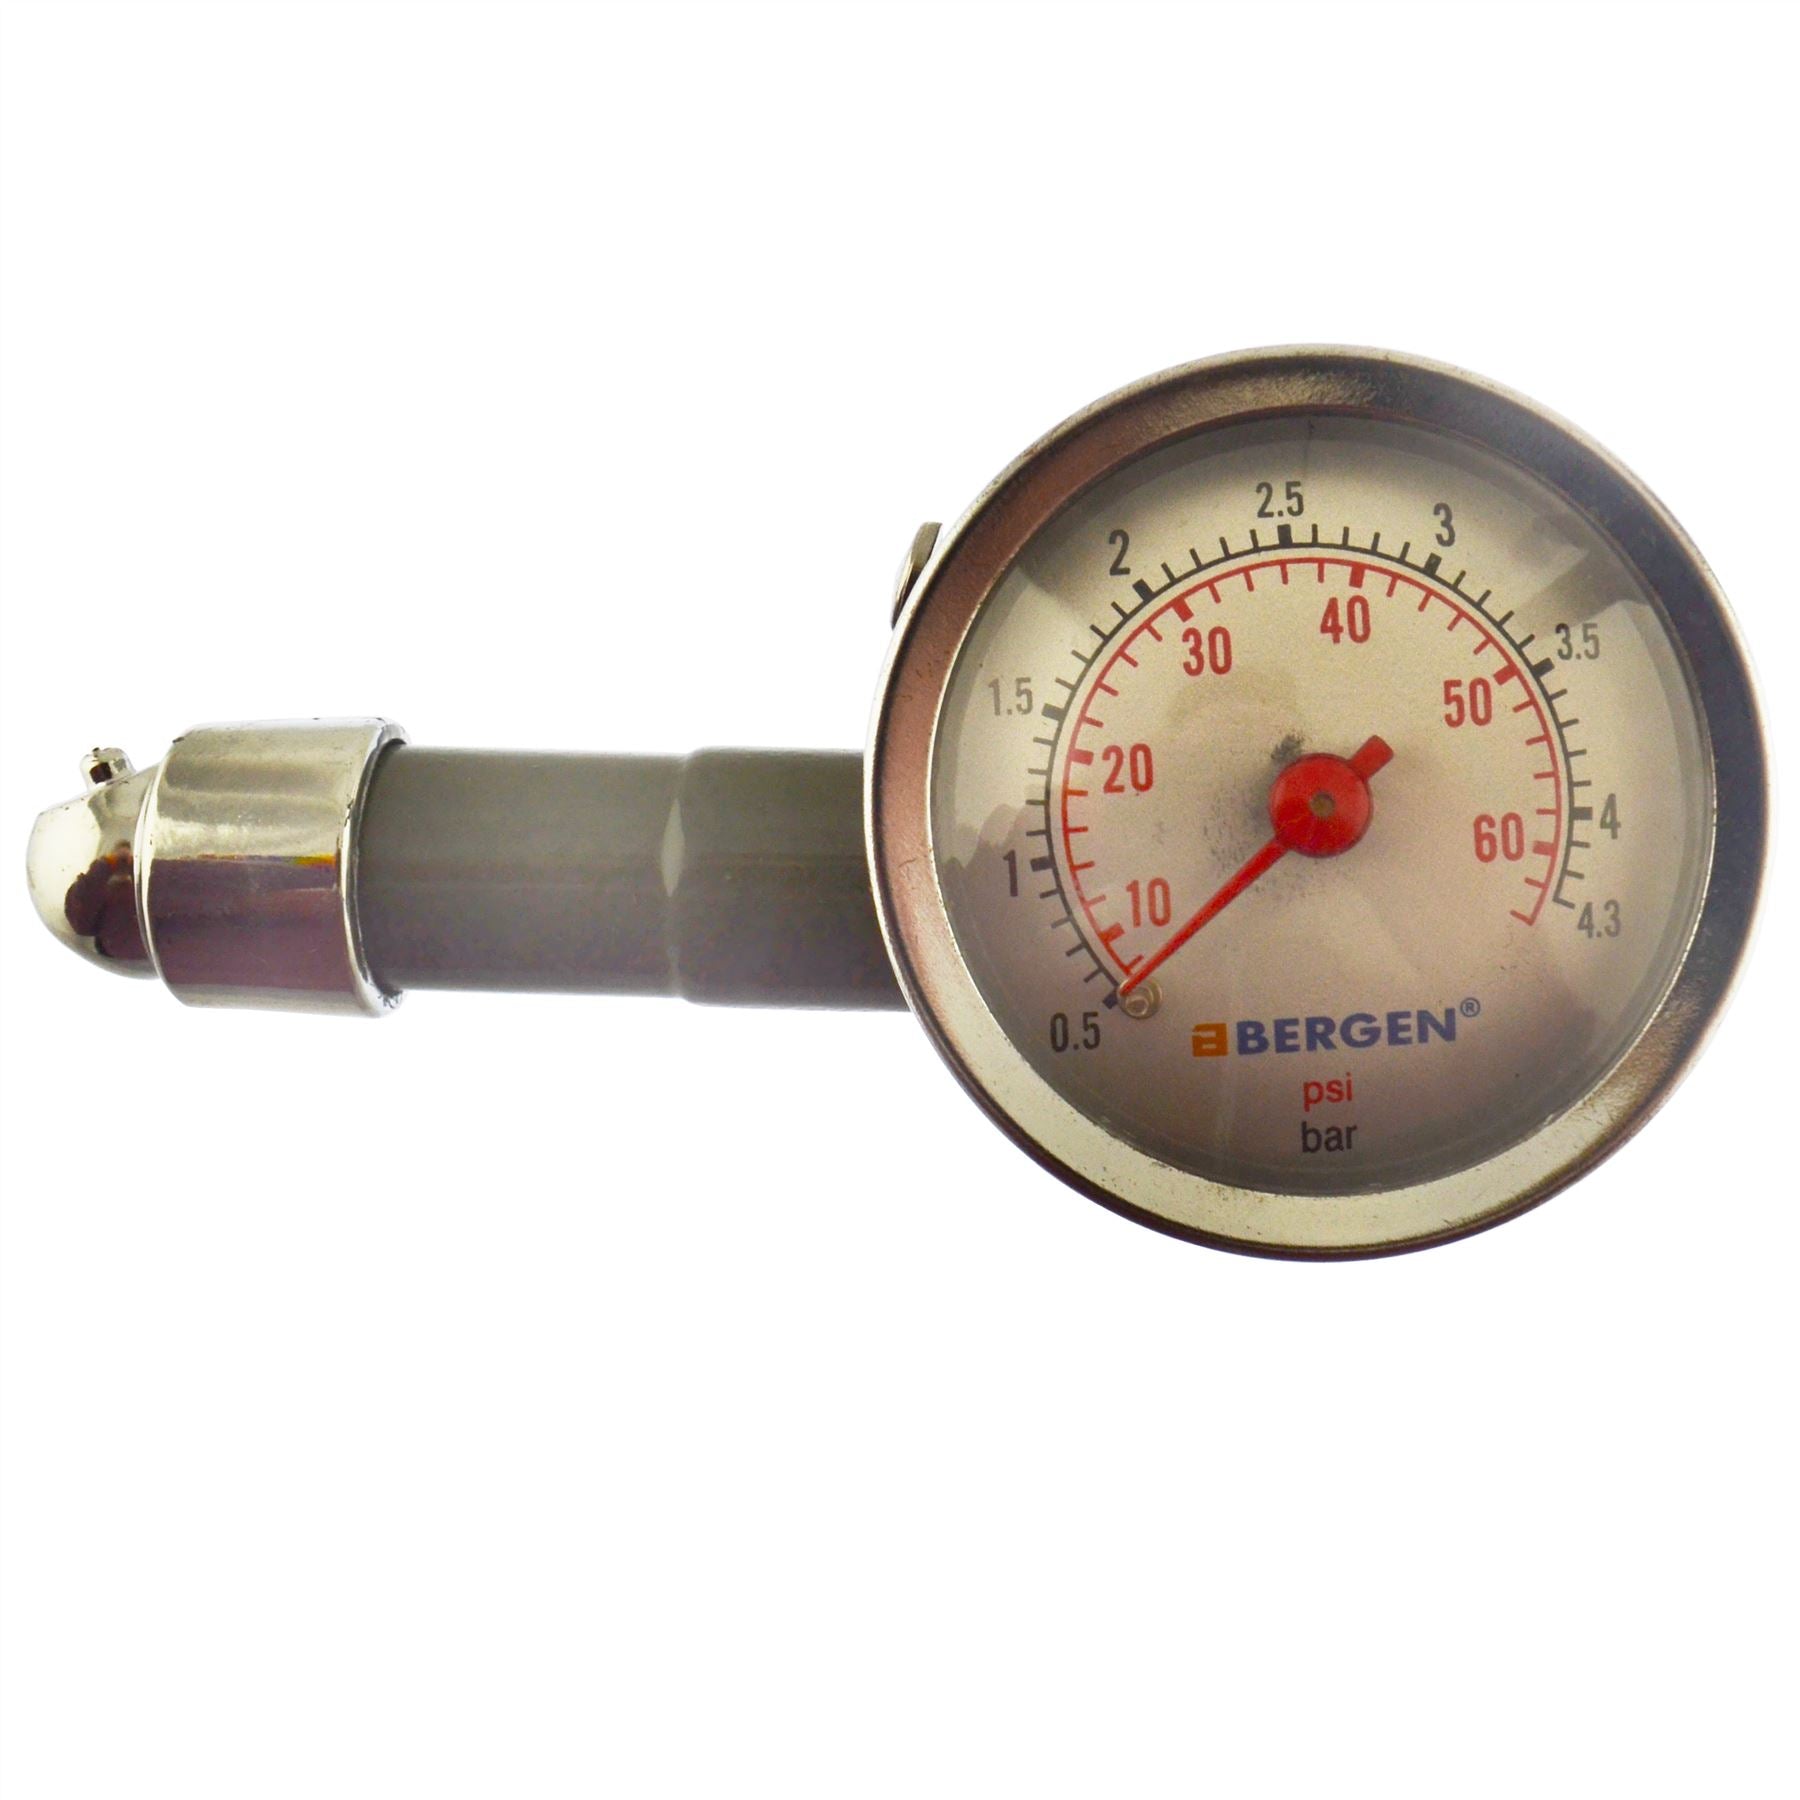 Tyre Pressure Gauge With Dial Push On Air Release 0 - 60 PSI 0 - 4.3 BAR Bergen